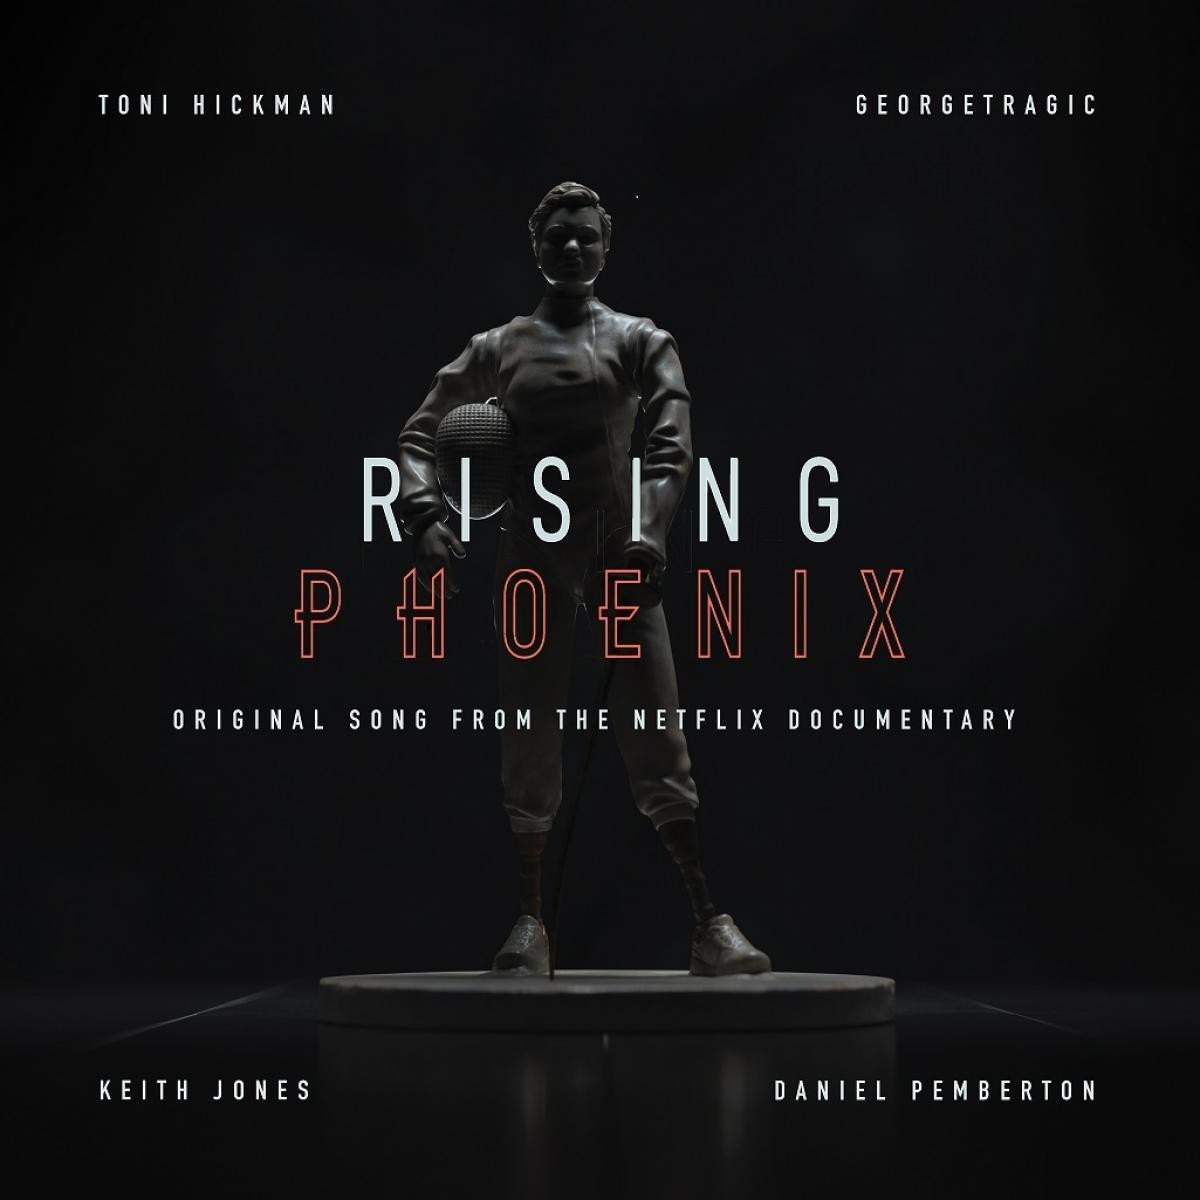 The song Rising Phoenix has been released ahead of the documentary of the same name coming out ©Netflix